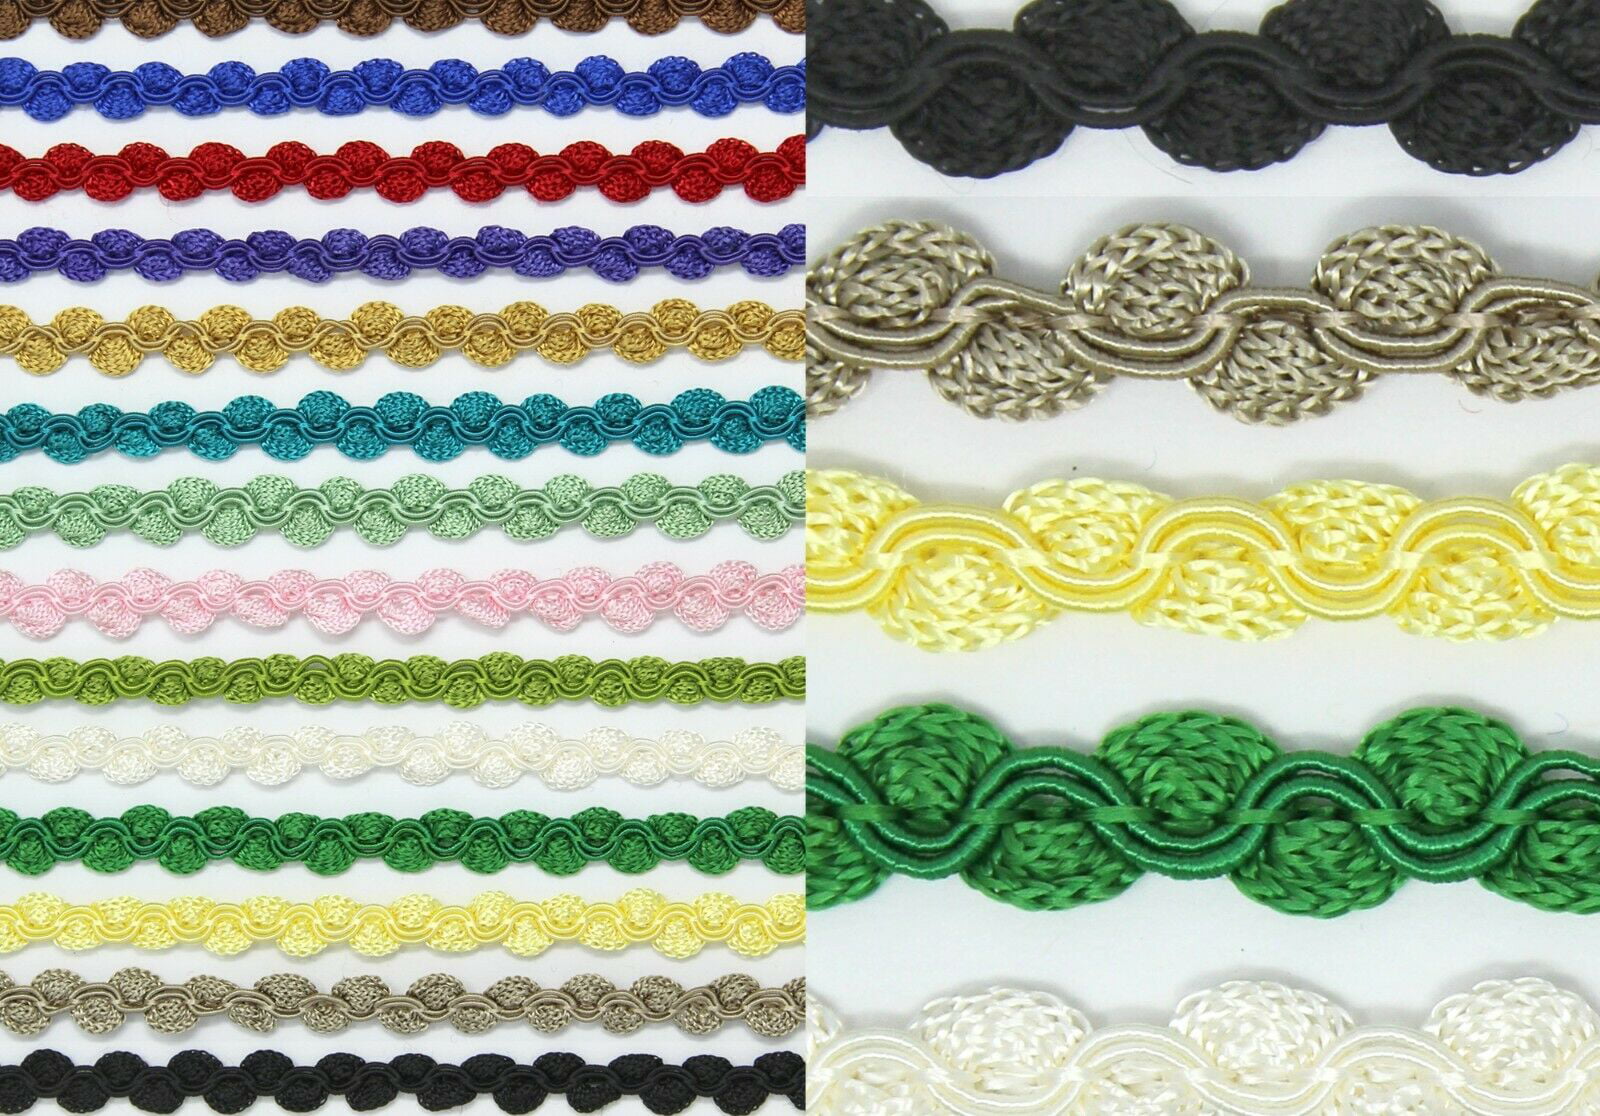 10 Continuous Yards 1 ScrollS Sequin Trimming Silver Many Colors Available!